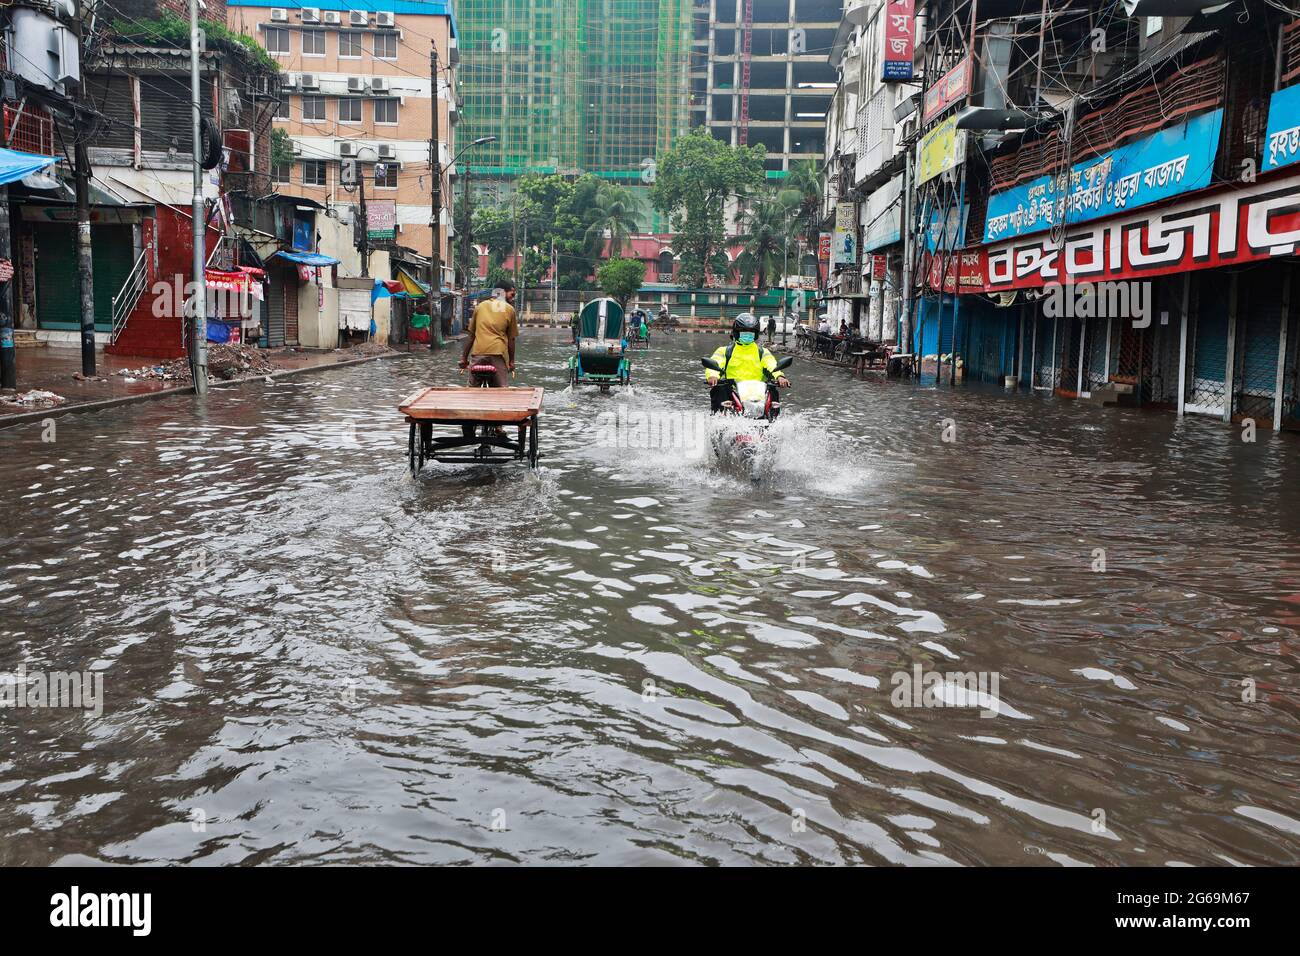 Dhaka, Bangladesh - July 04, 2021: Vehicles try to drive through a flooded street in Dhaka, Bangladesh. Encroachment of canals is contributing to the Stock Photo